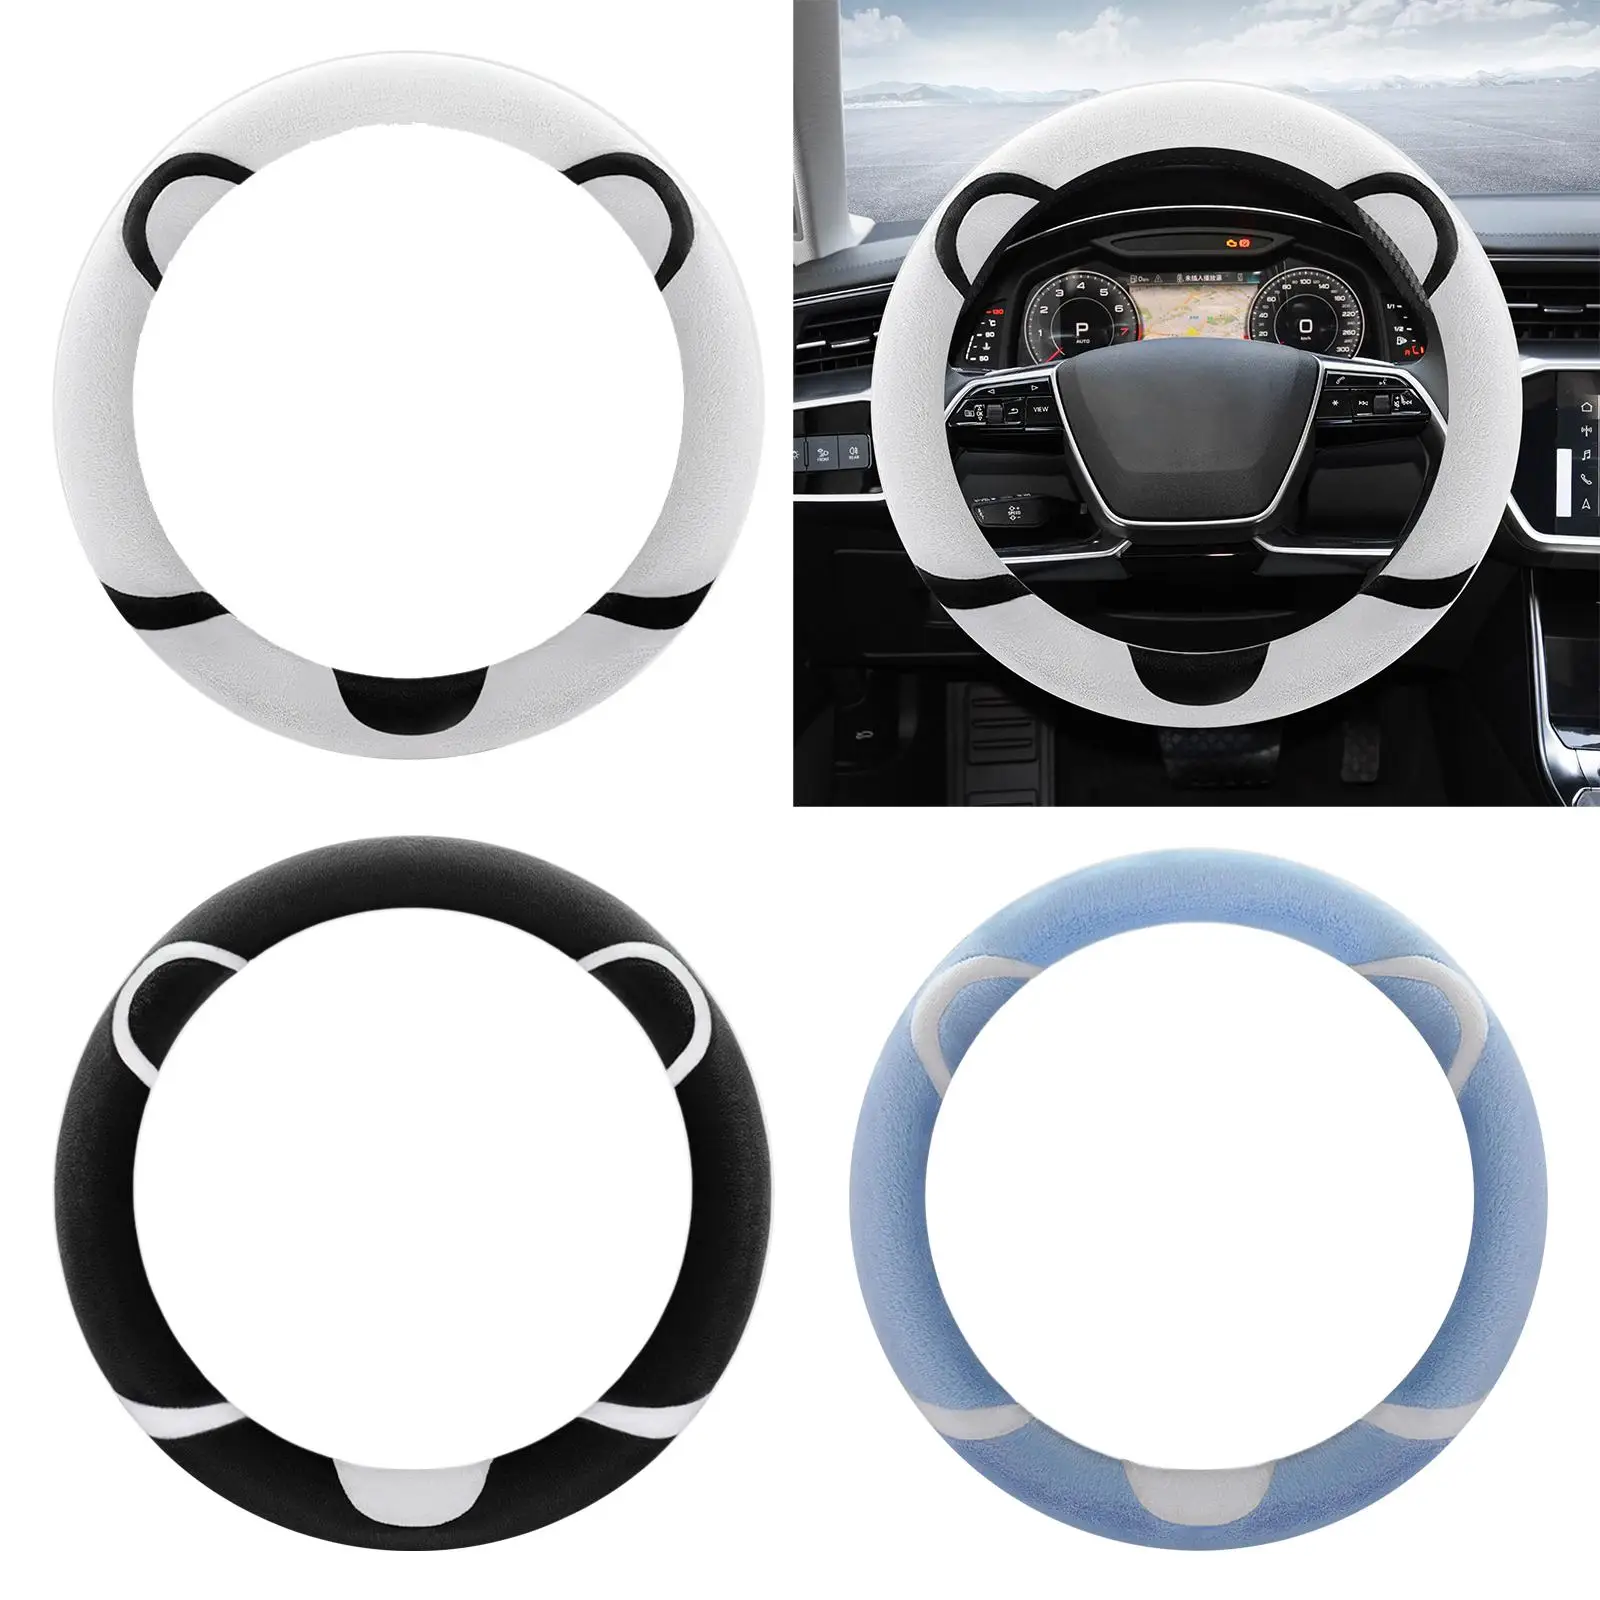 Round Car Steering Wheel Cover, Protective Cover, Auto Accessories